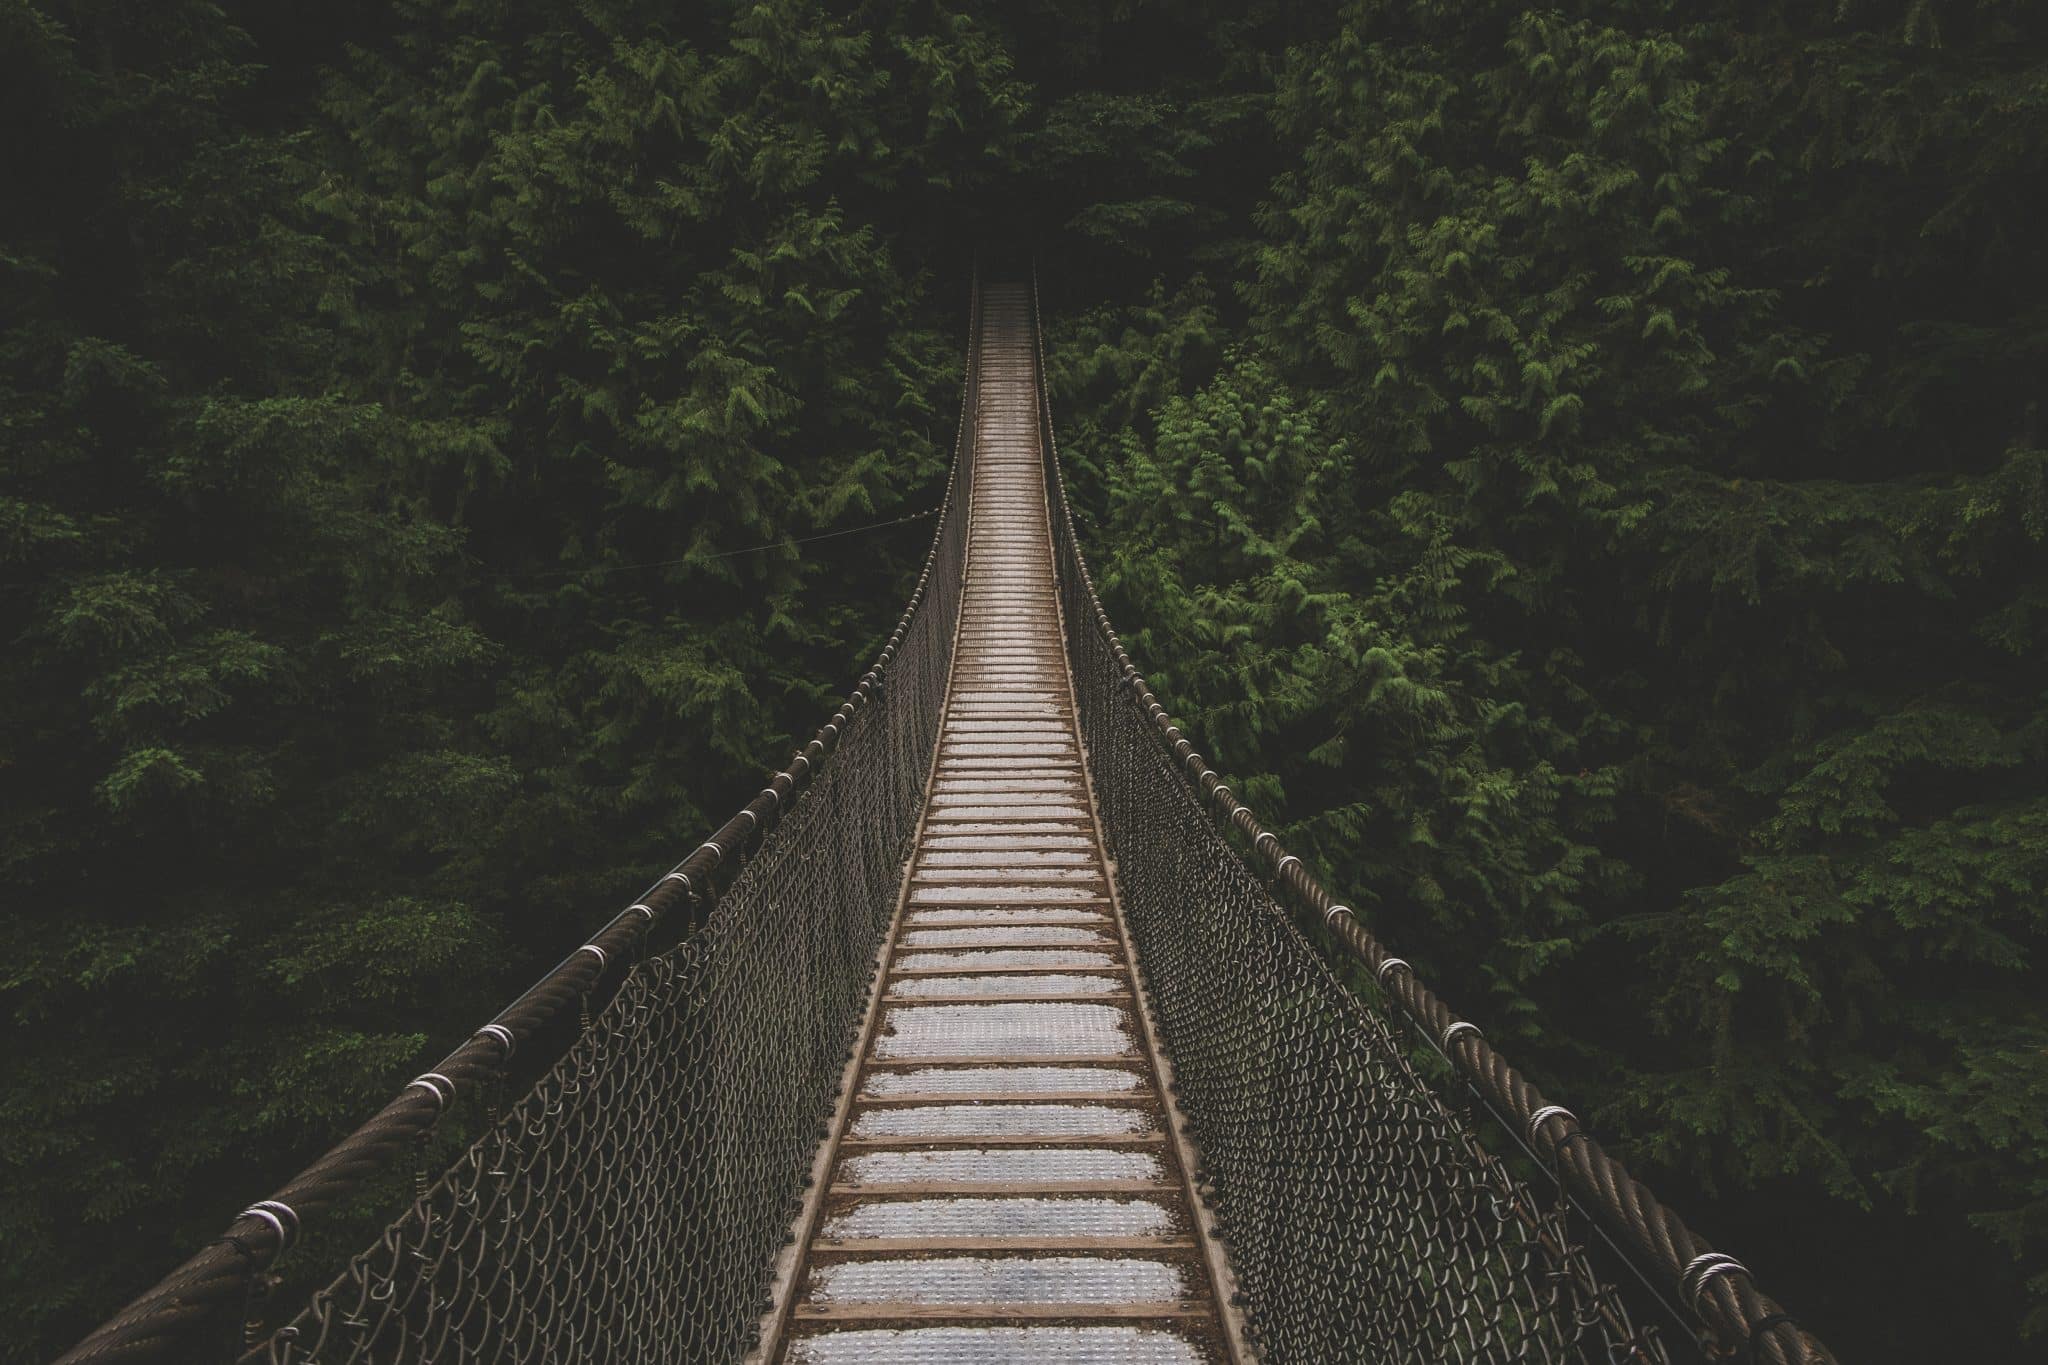 A bridge leading down into a forest.